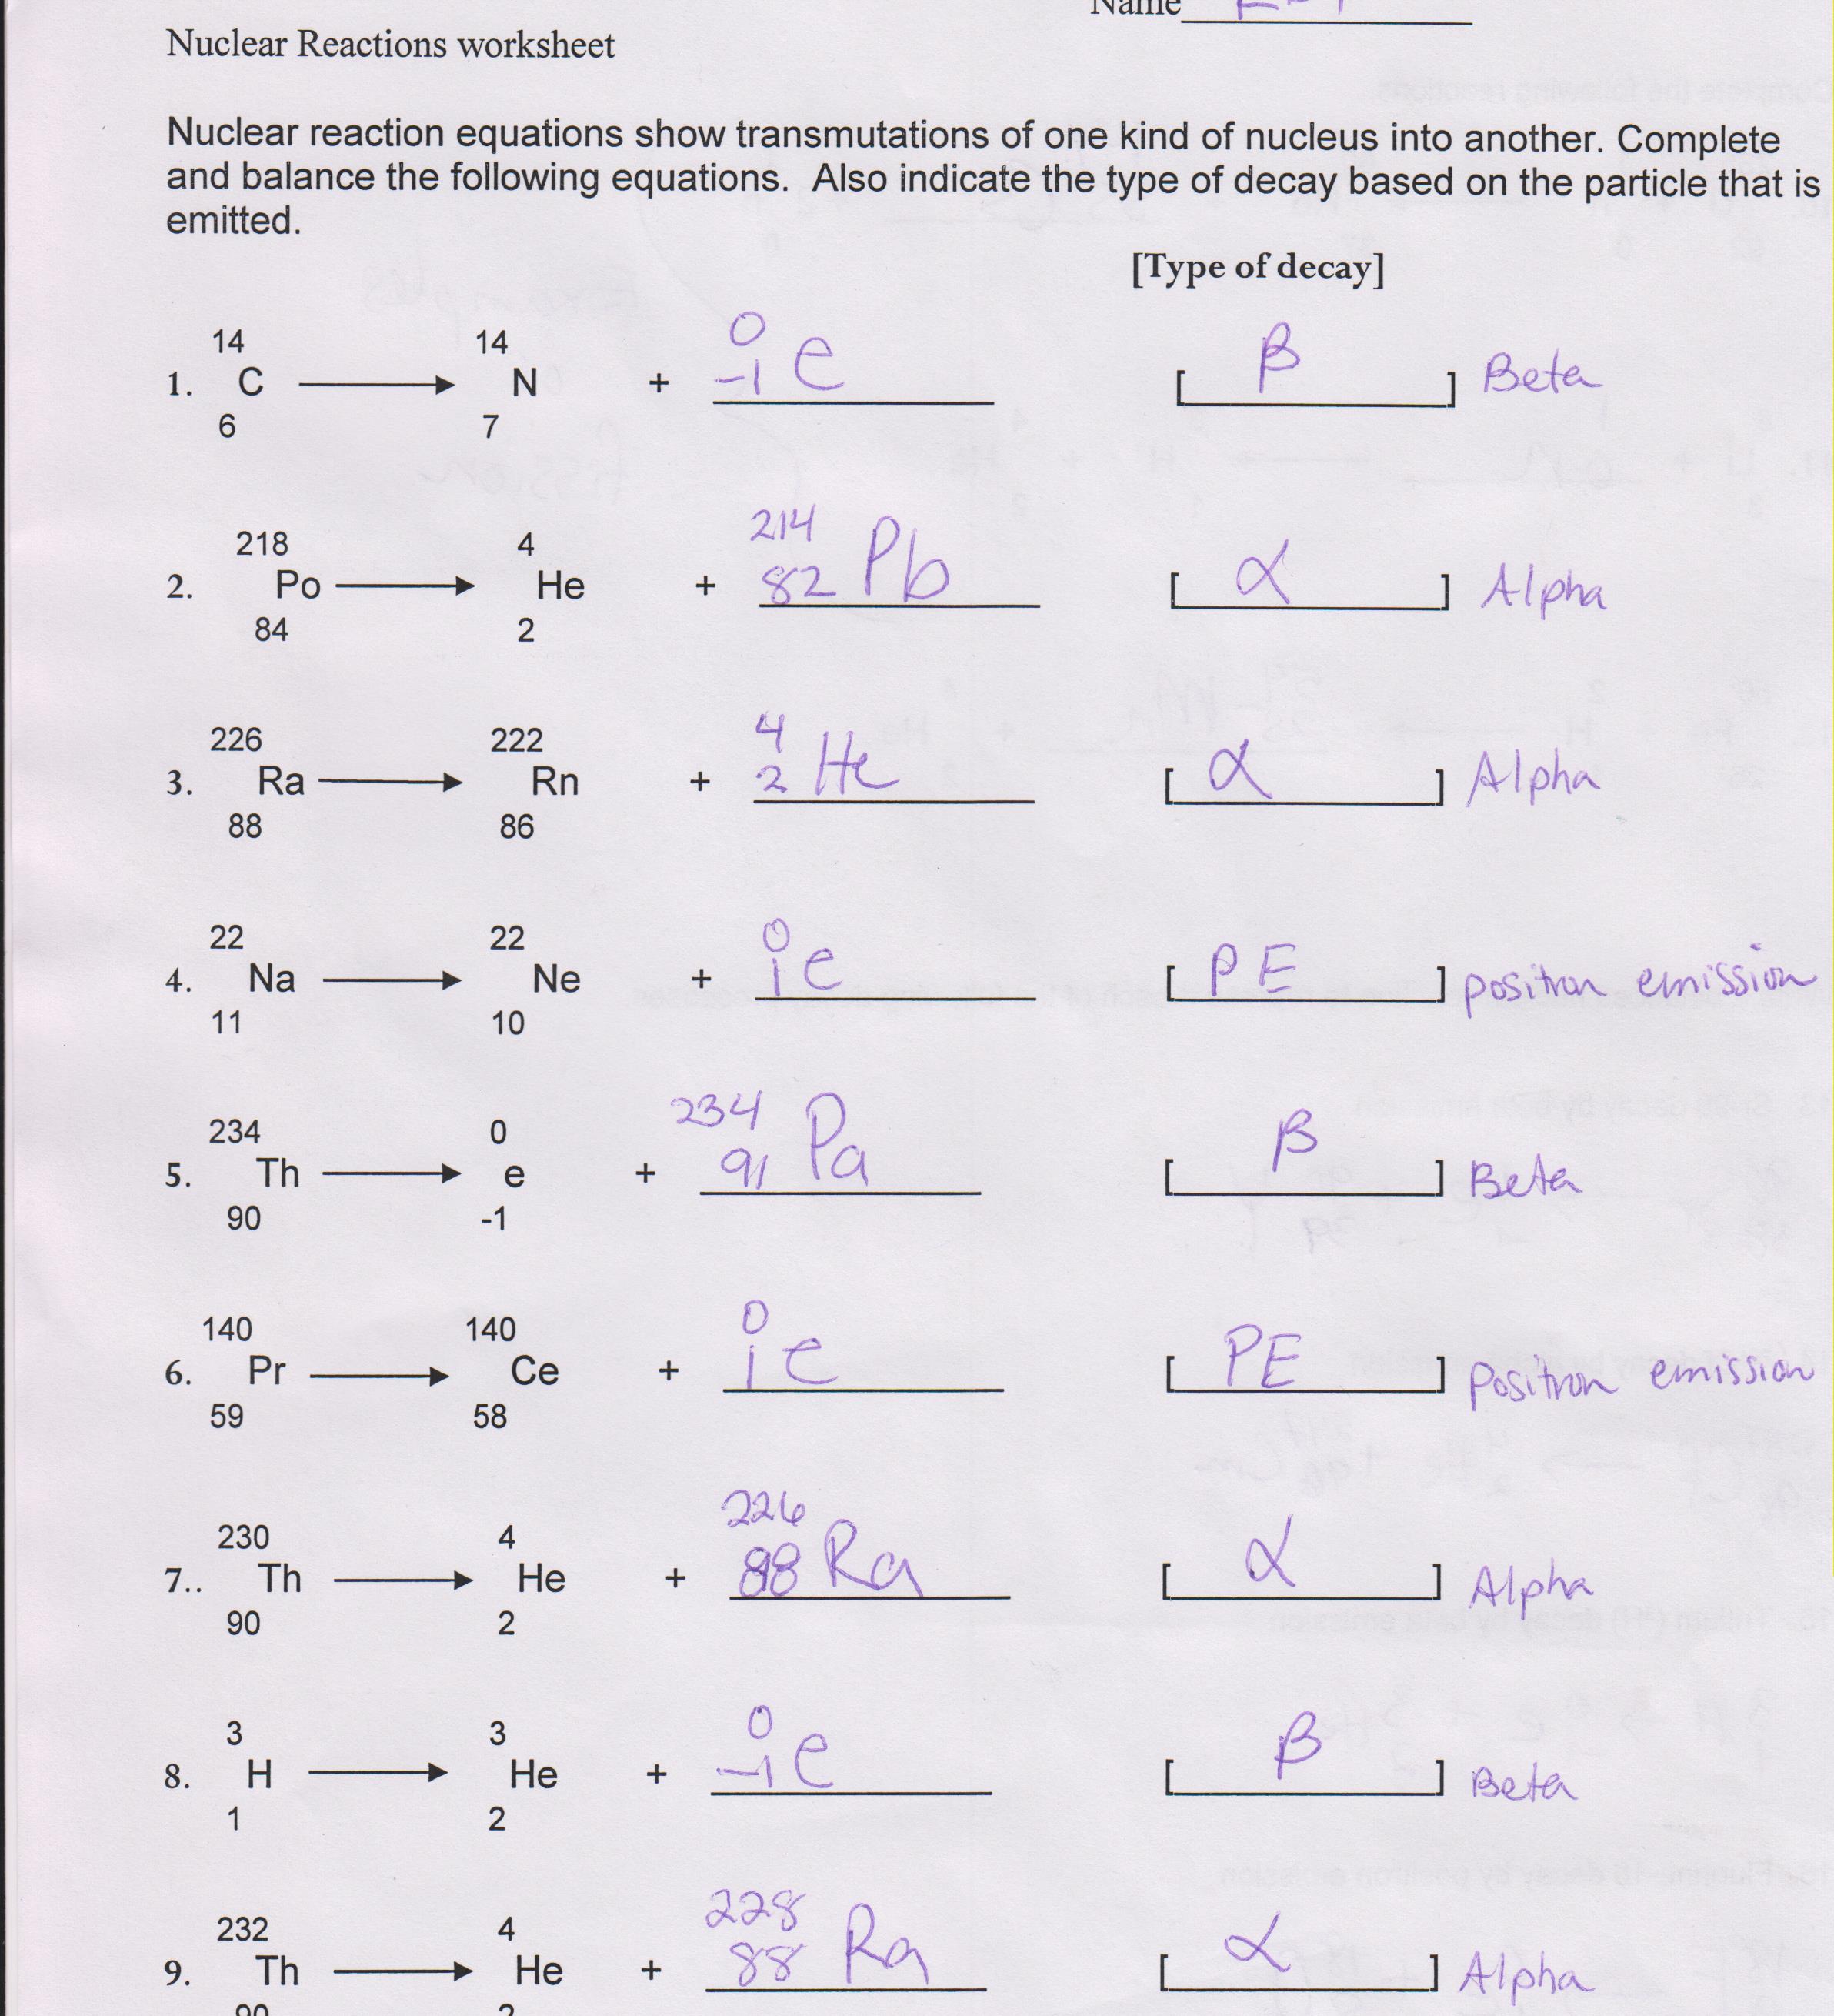 Finishing up Nuclear Equations Regarding Nuclear Decay Worksheet Answers